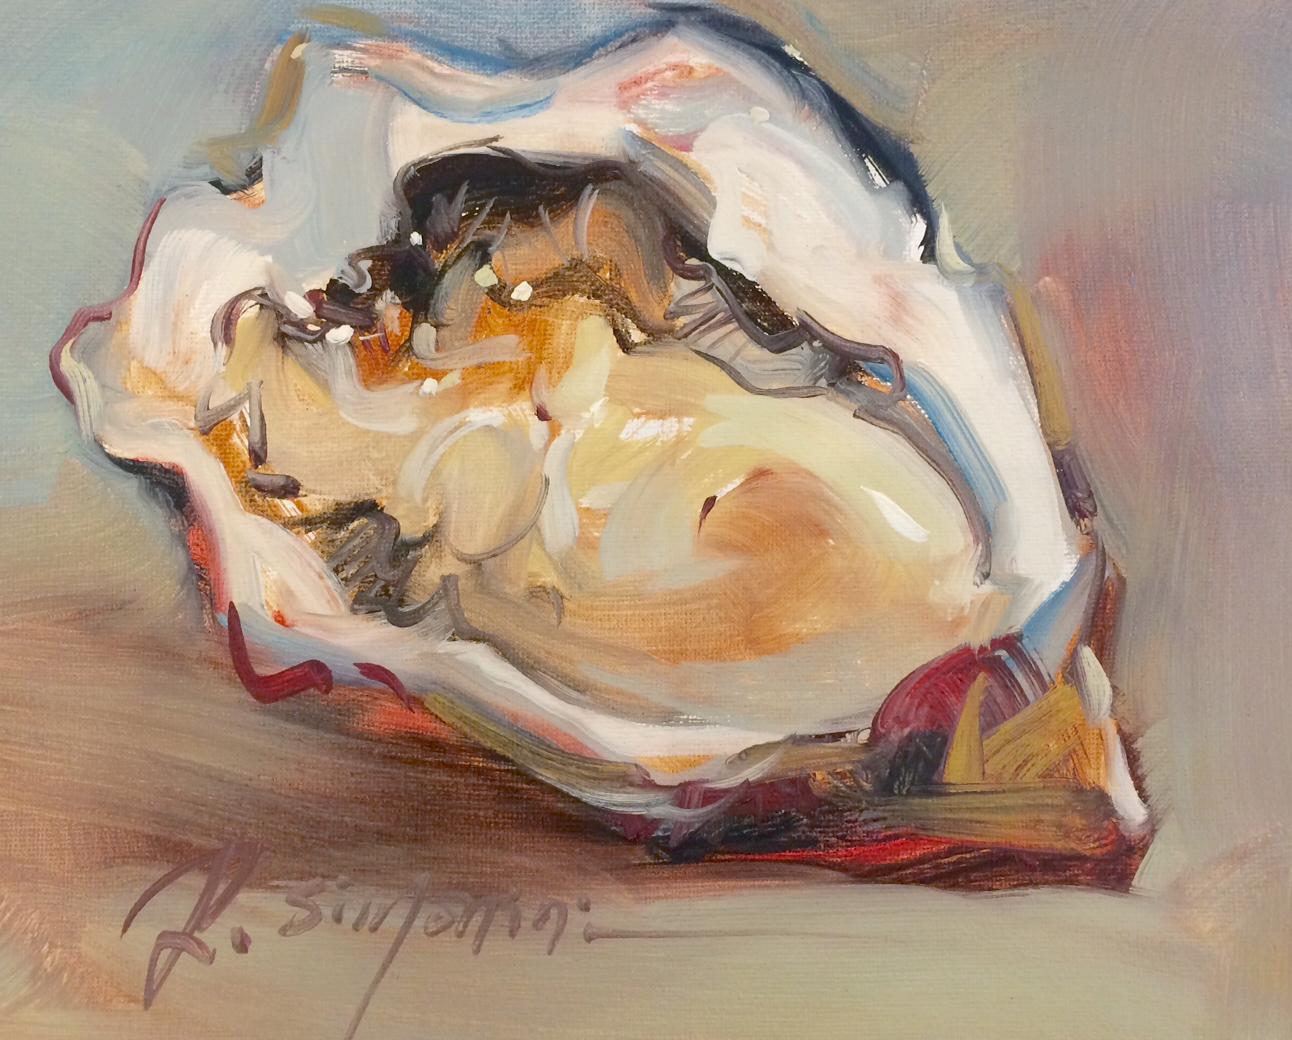 This painting by artist Ray Simonini titled "Oyster" is a 8x10 nautical oil painting on canvas featuring a close-up of an oyster shell against a colorful background. 

About the artist:
Simonini was born in China in 1981. He became intrigued by